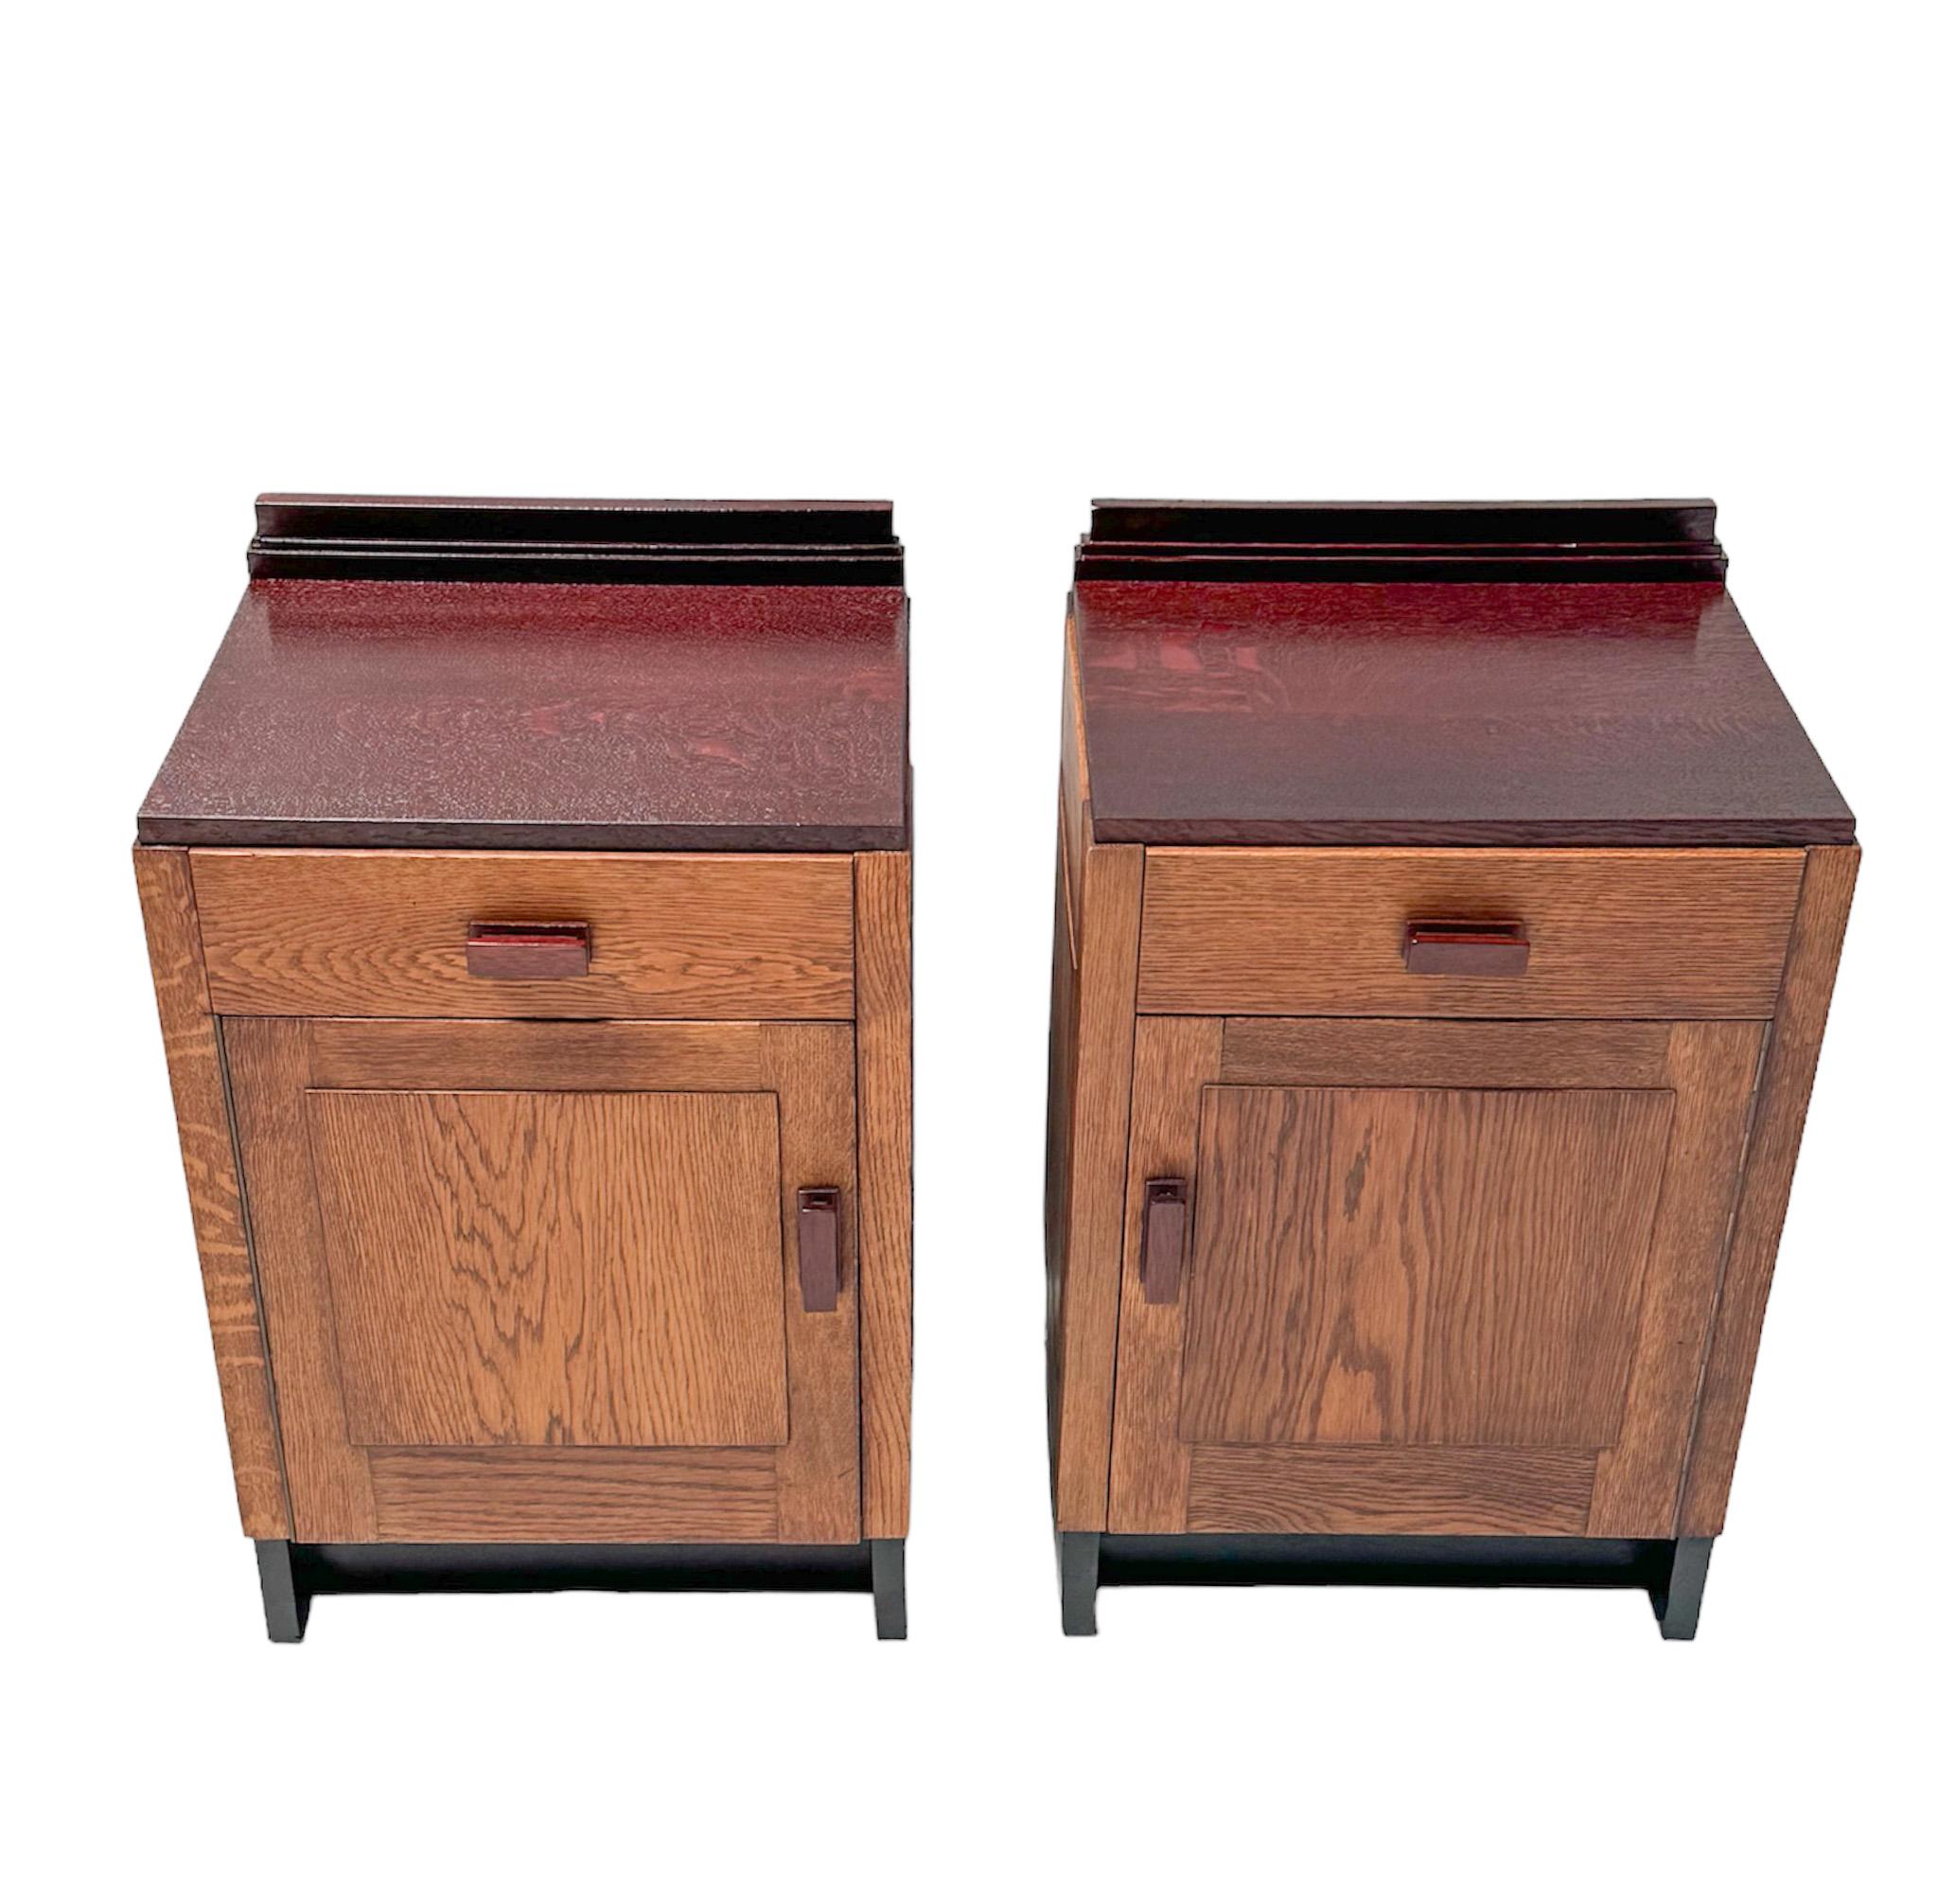 Stunning and rare pair of Art Deco Modernist nightstands or bedside tables.
Striking Dutch design from the 1920s.
Solid oak bases with original red lacquered tops and handles on doors and drawers.
This wonderful pair is in very good original